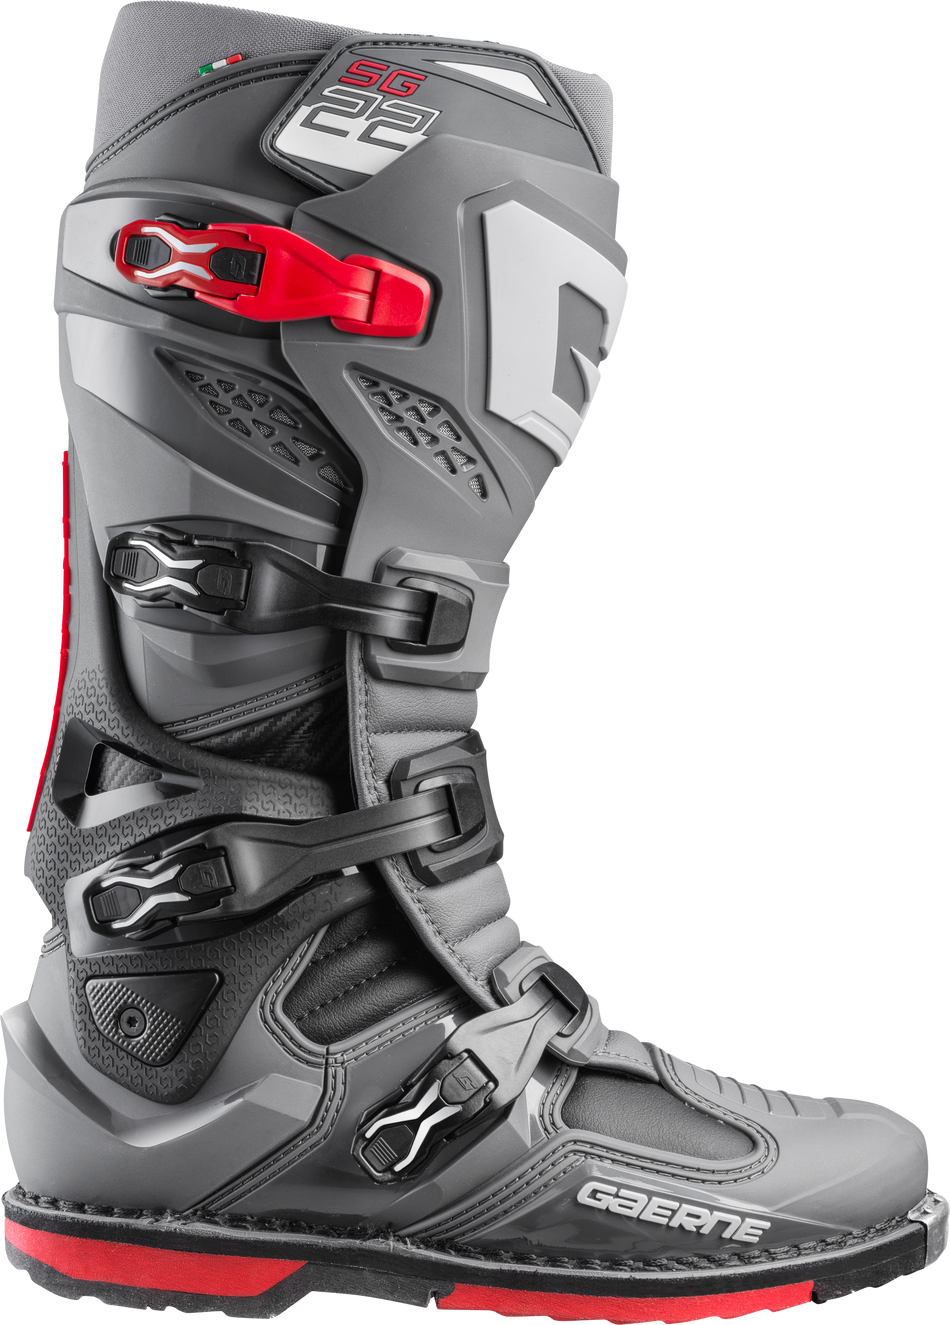 GAERNE Sg-22 Boots Anthracite/Black/Red Sz 13 2262-007-13